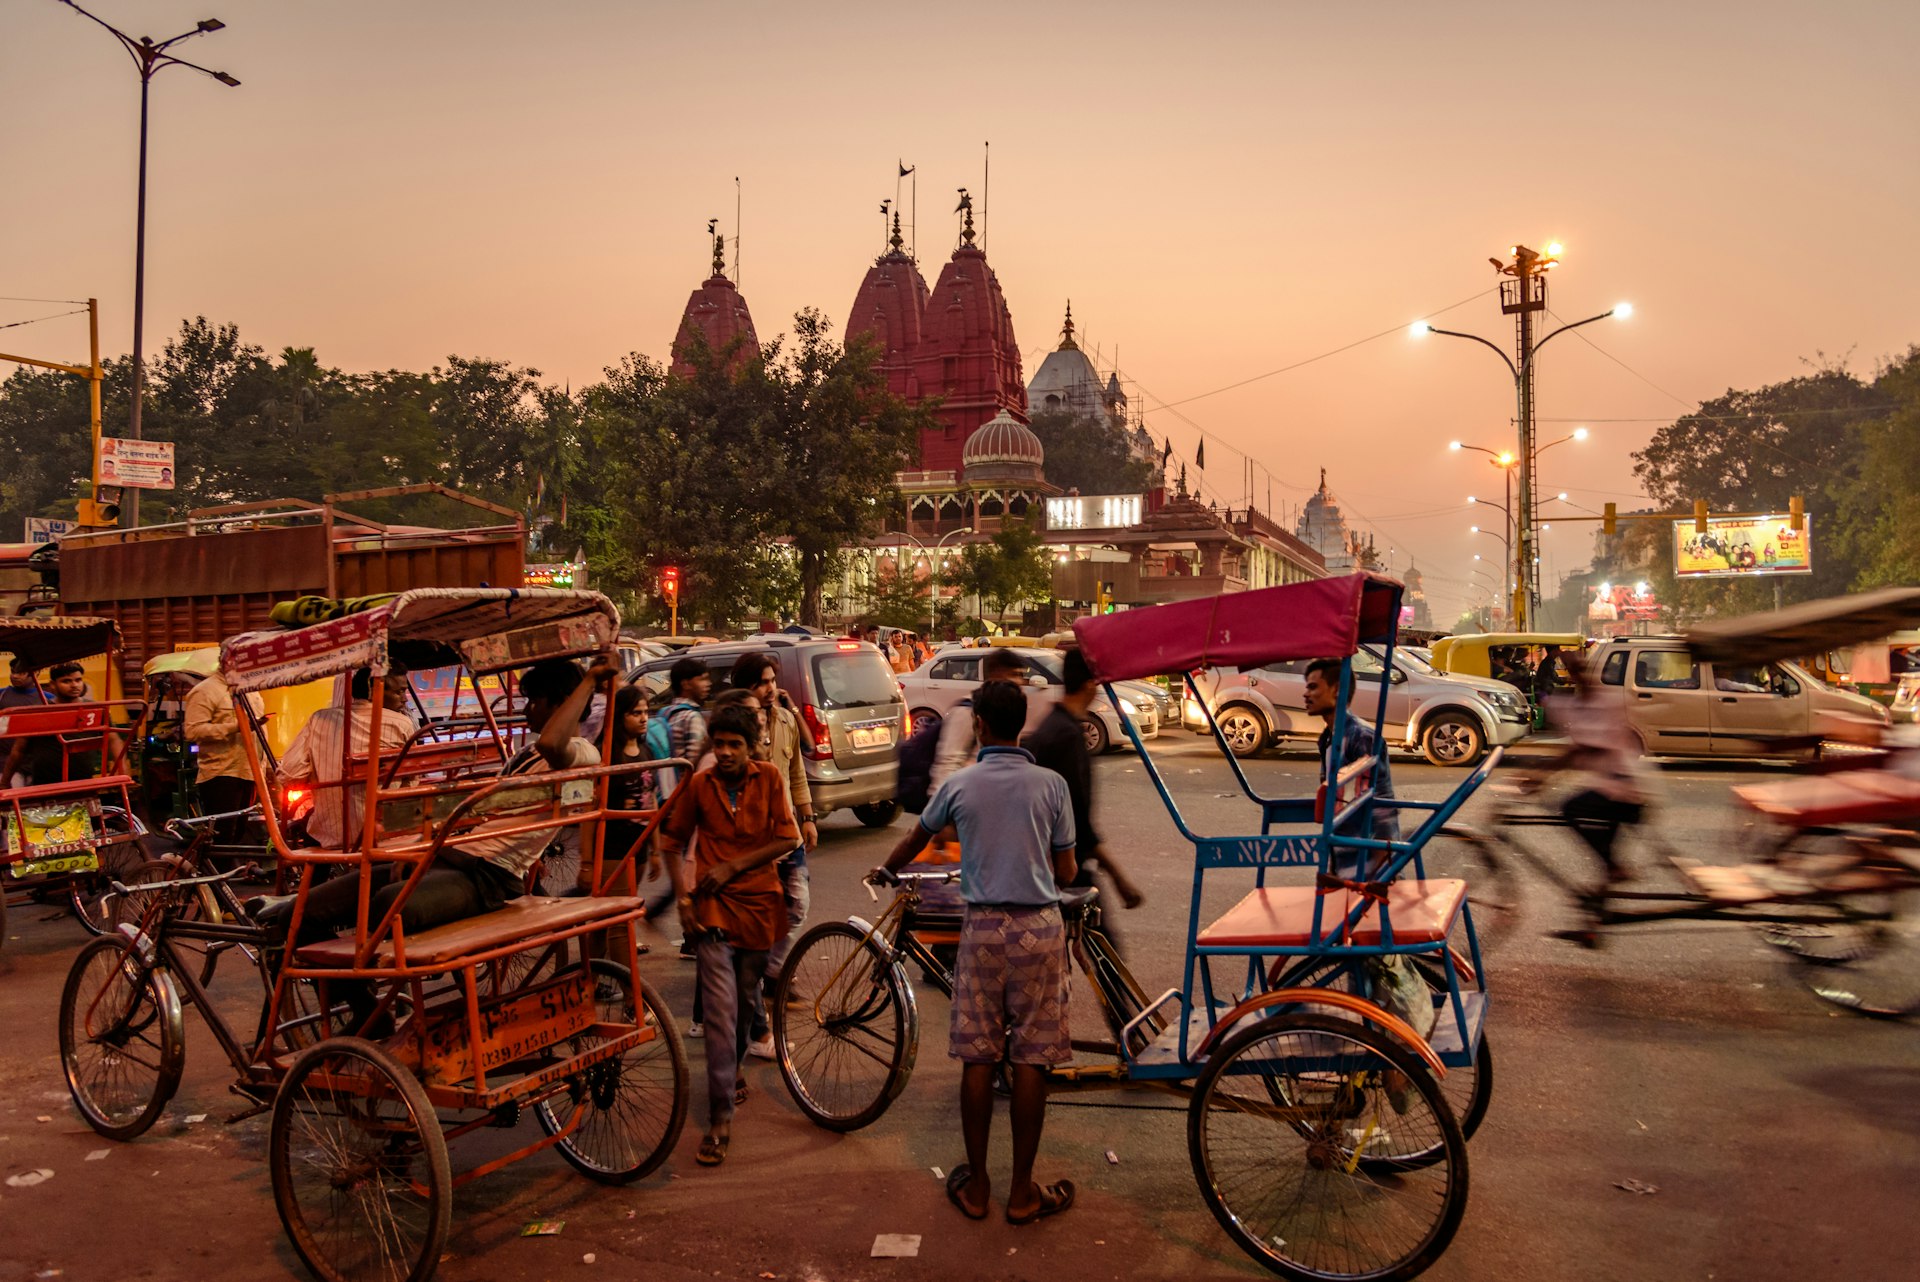 Busy street traffic in Chandni Chowk market with rickshaws in India